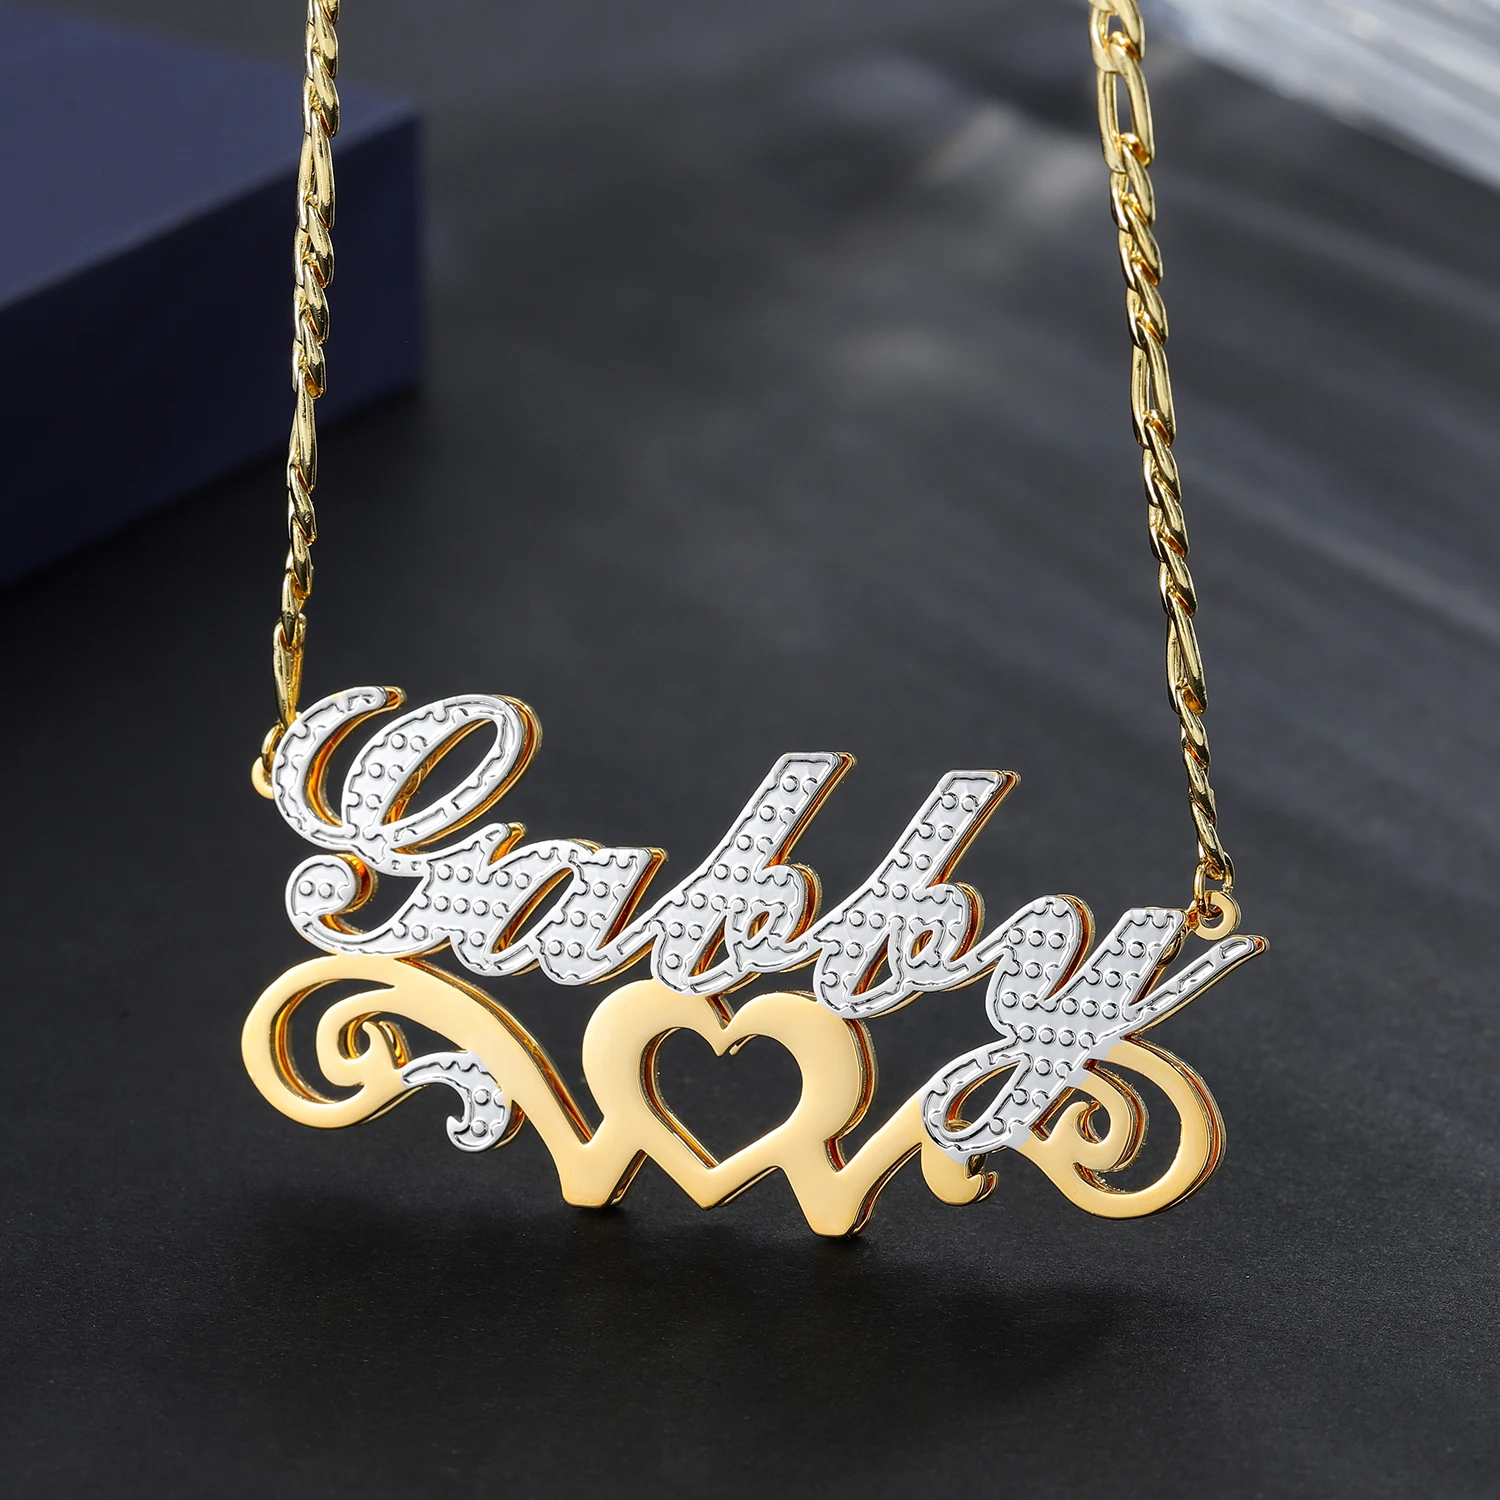 Customized Necklace Double Plated Heavenly Love Name Necklace For Women Name Plate Stainless Steel Name Pendant Charm Jewelry